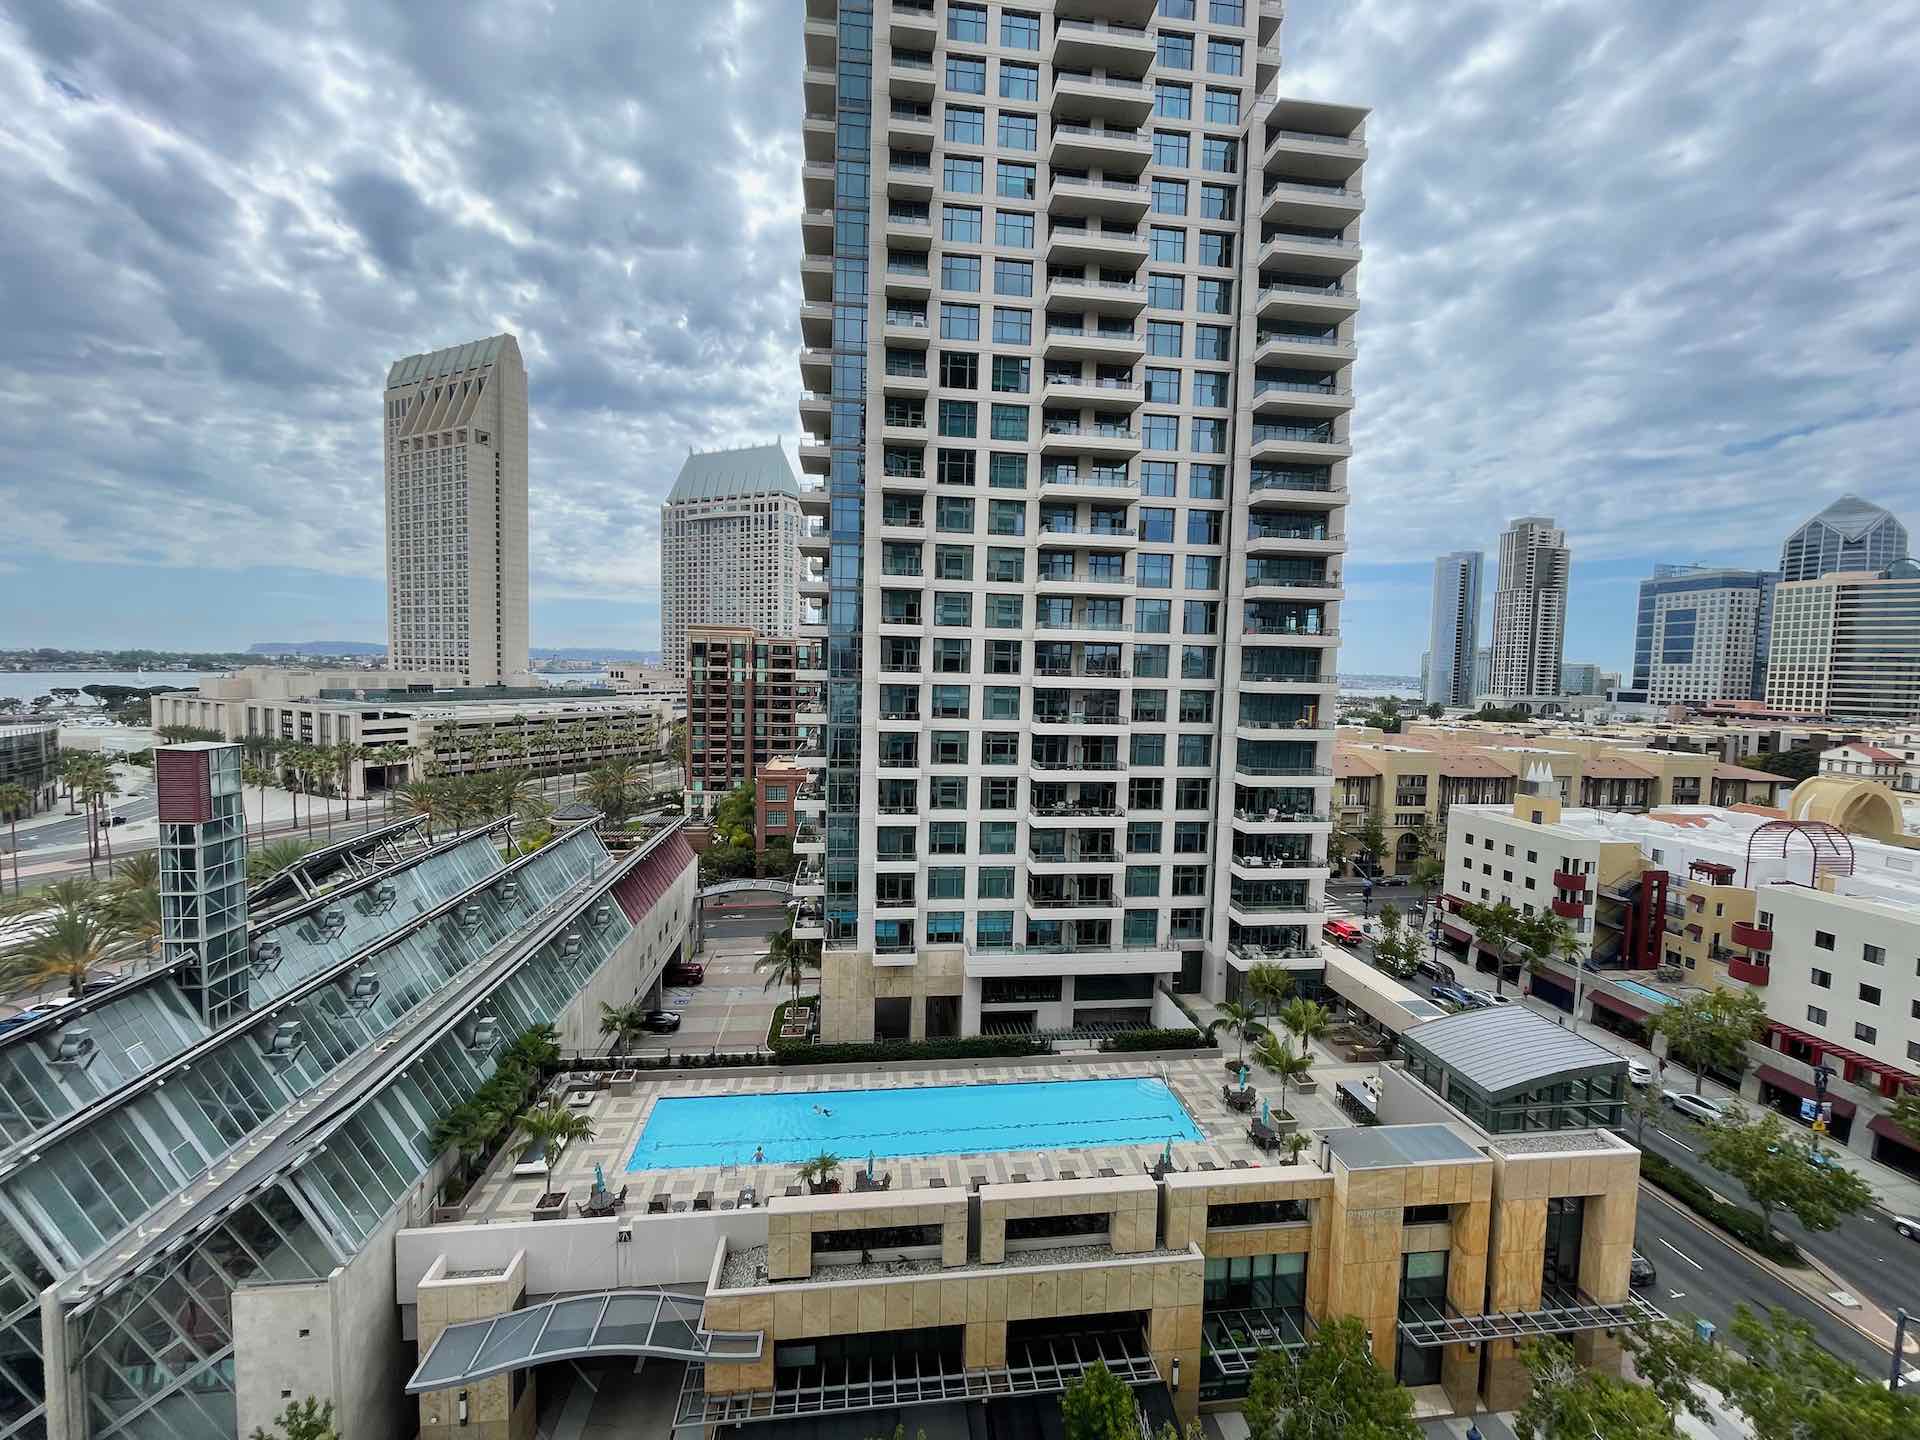 Pool Deck in high rise building